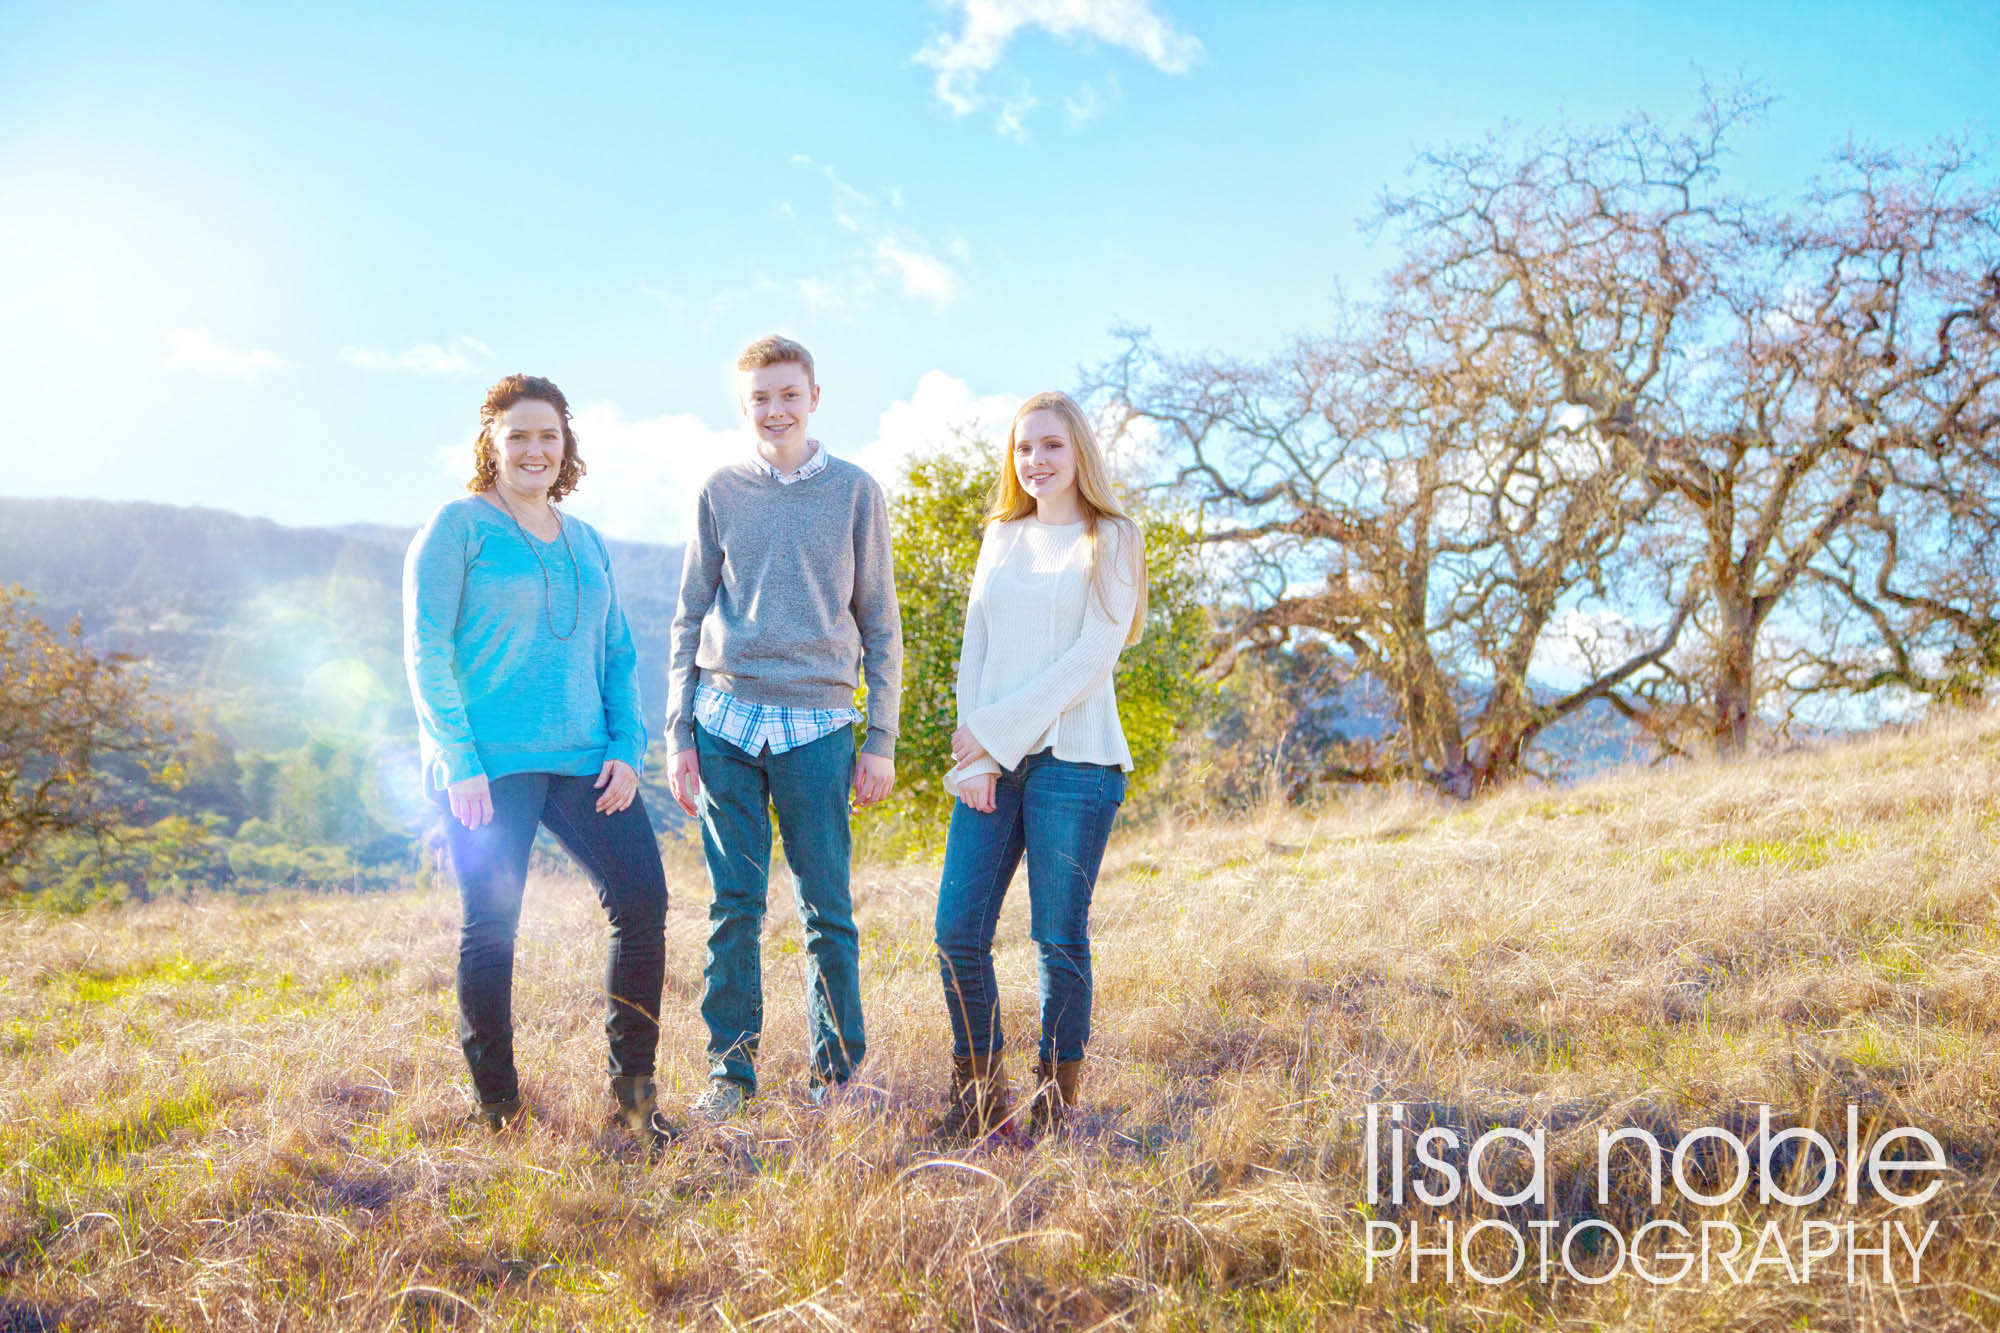 Family portrait in a grass field by Bay Area professional photographer Lisa Noble